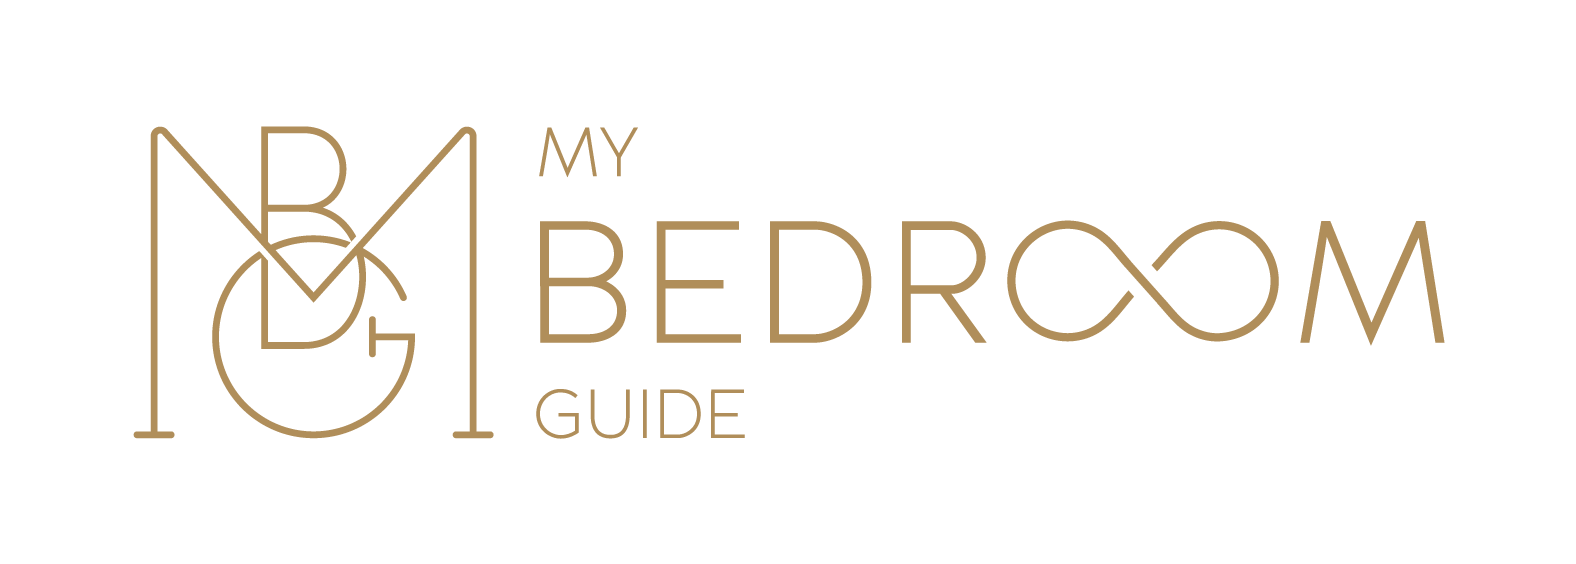 My Bedroom Guide - The Best Adult Game for Couples